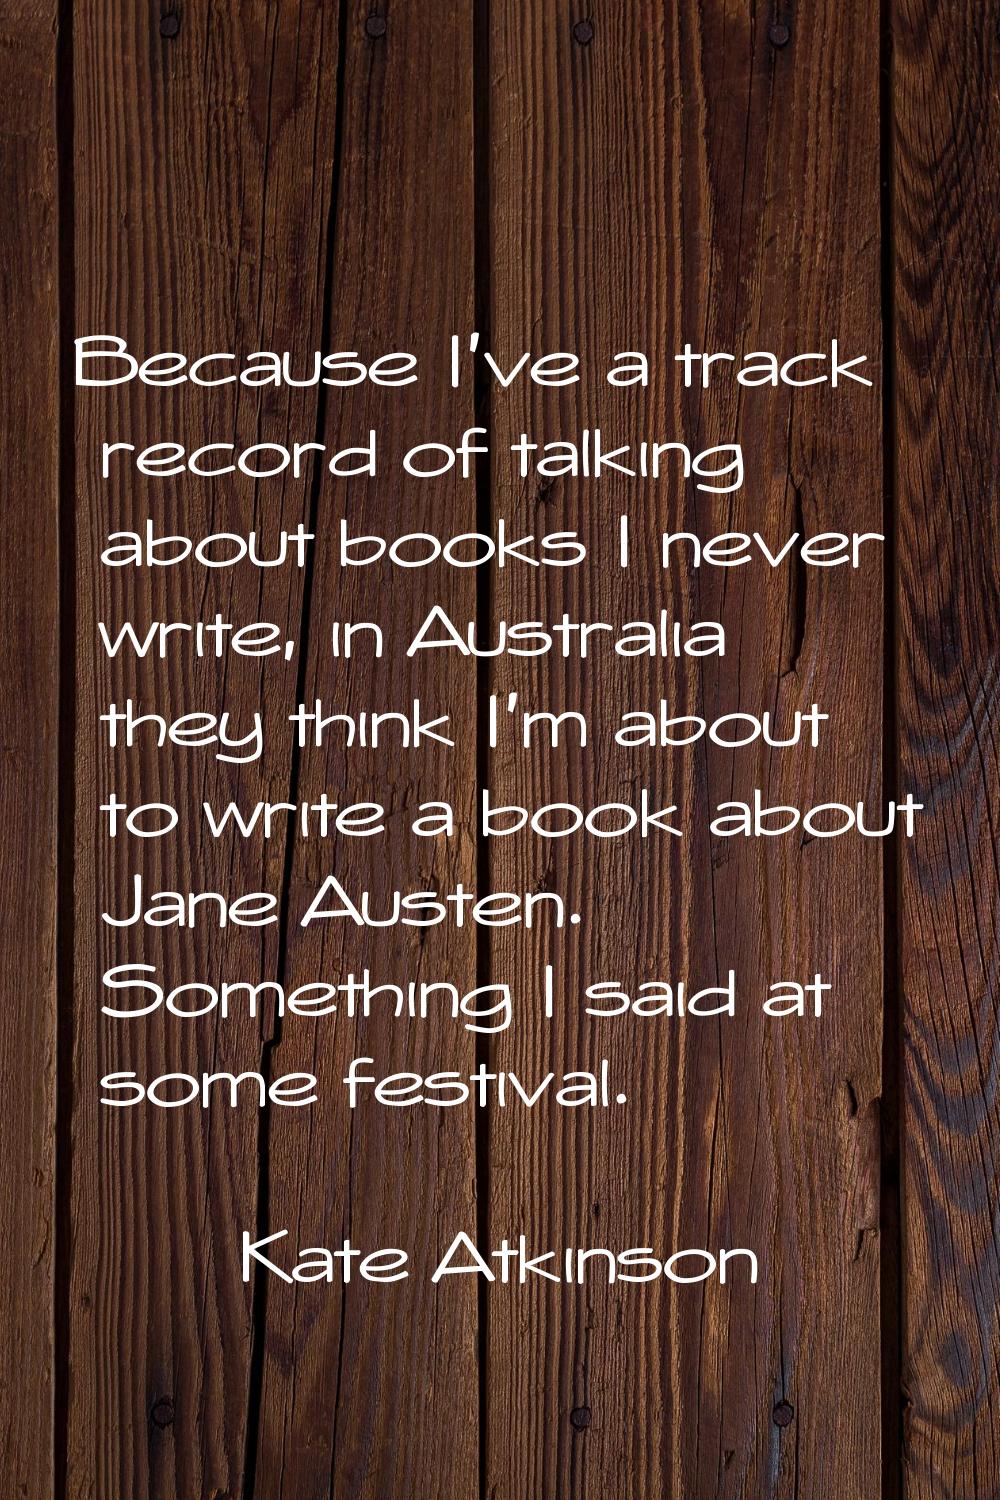 Because I've a track record of talking about books I never write, in Australia they think I'm about